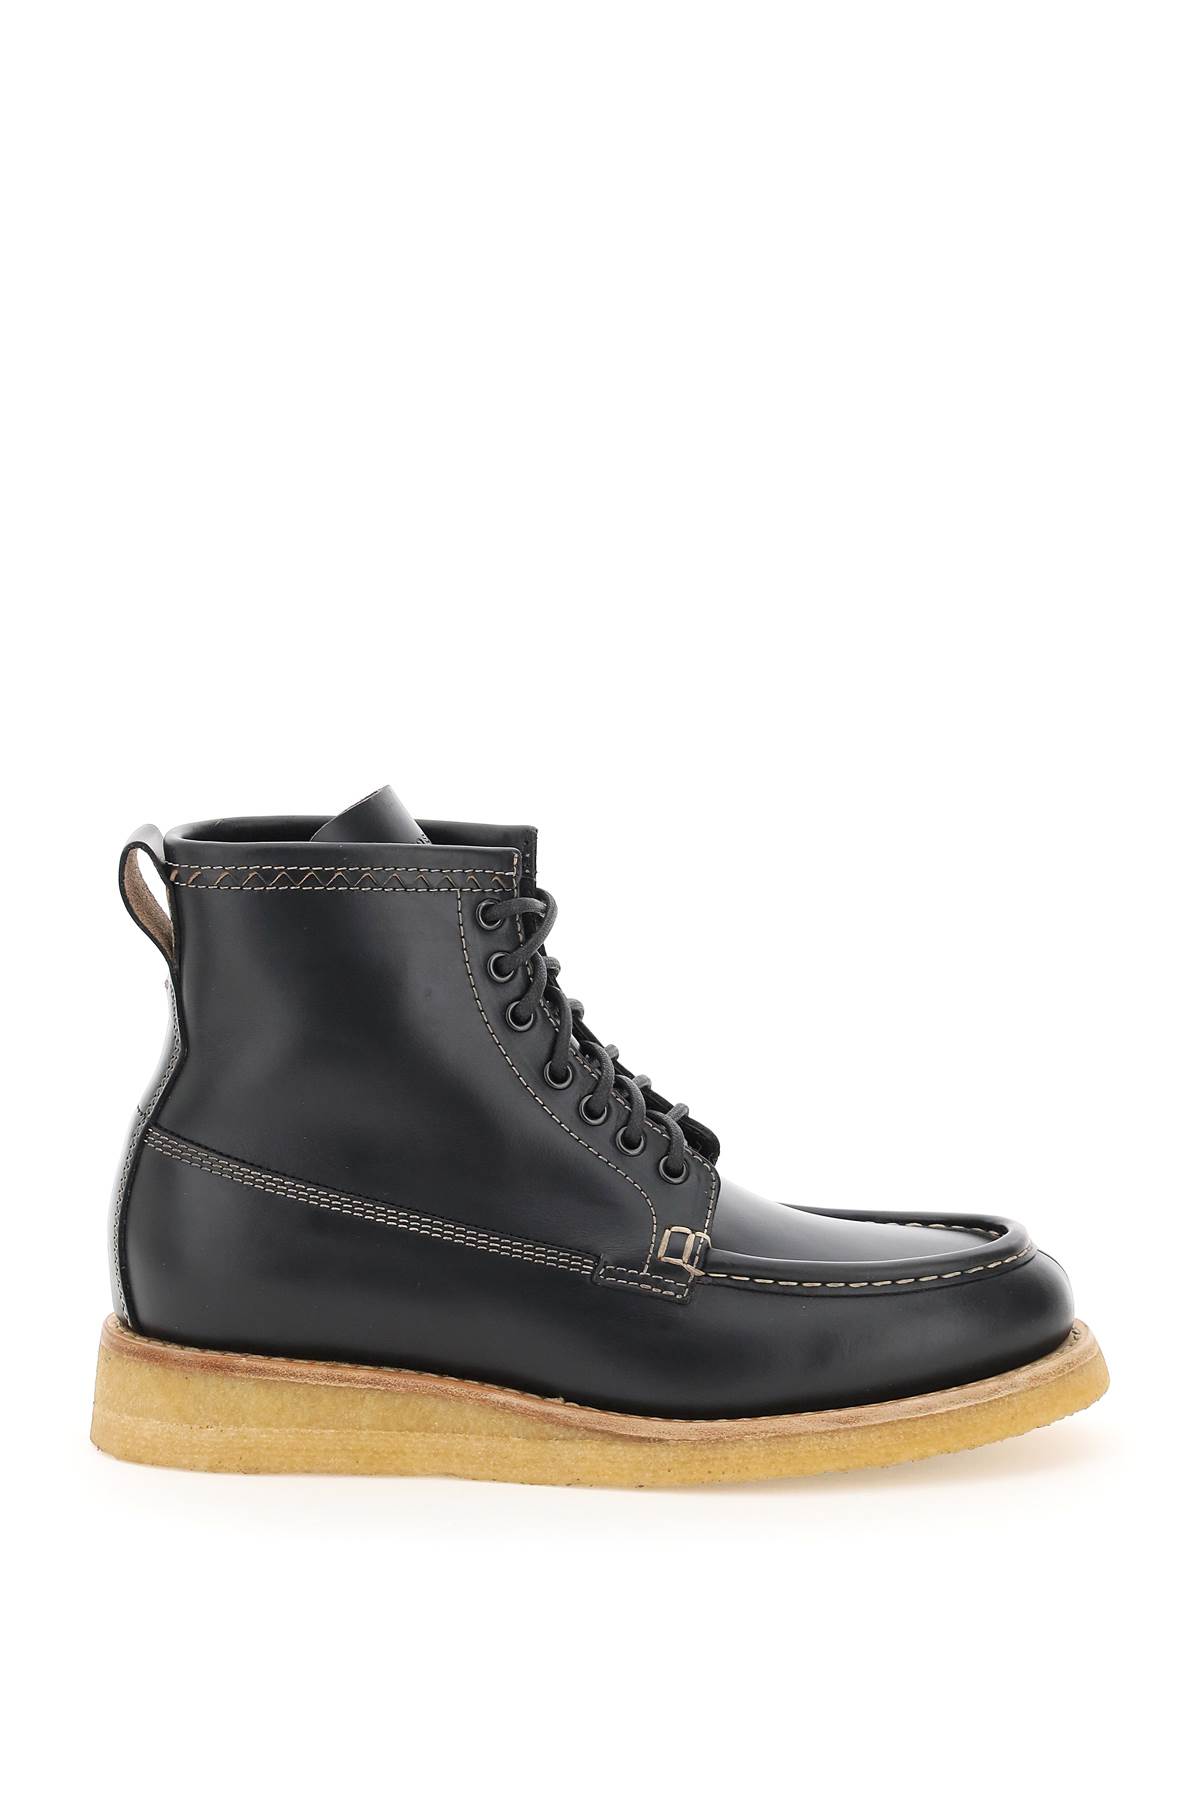 Henderson Baracco Lace-up Leather Boots